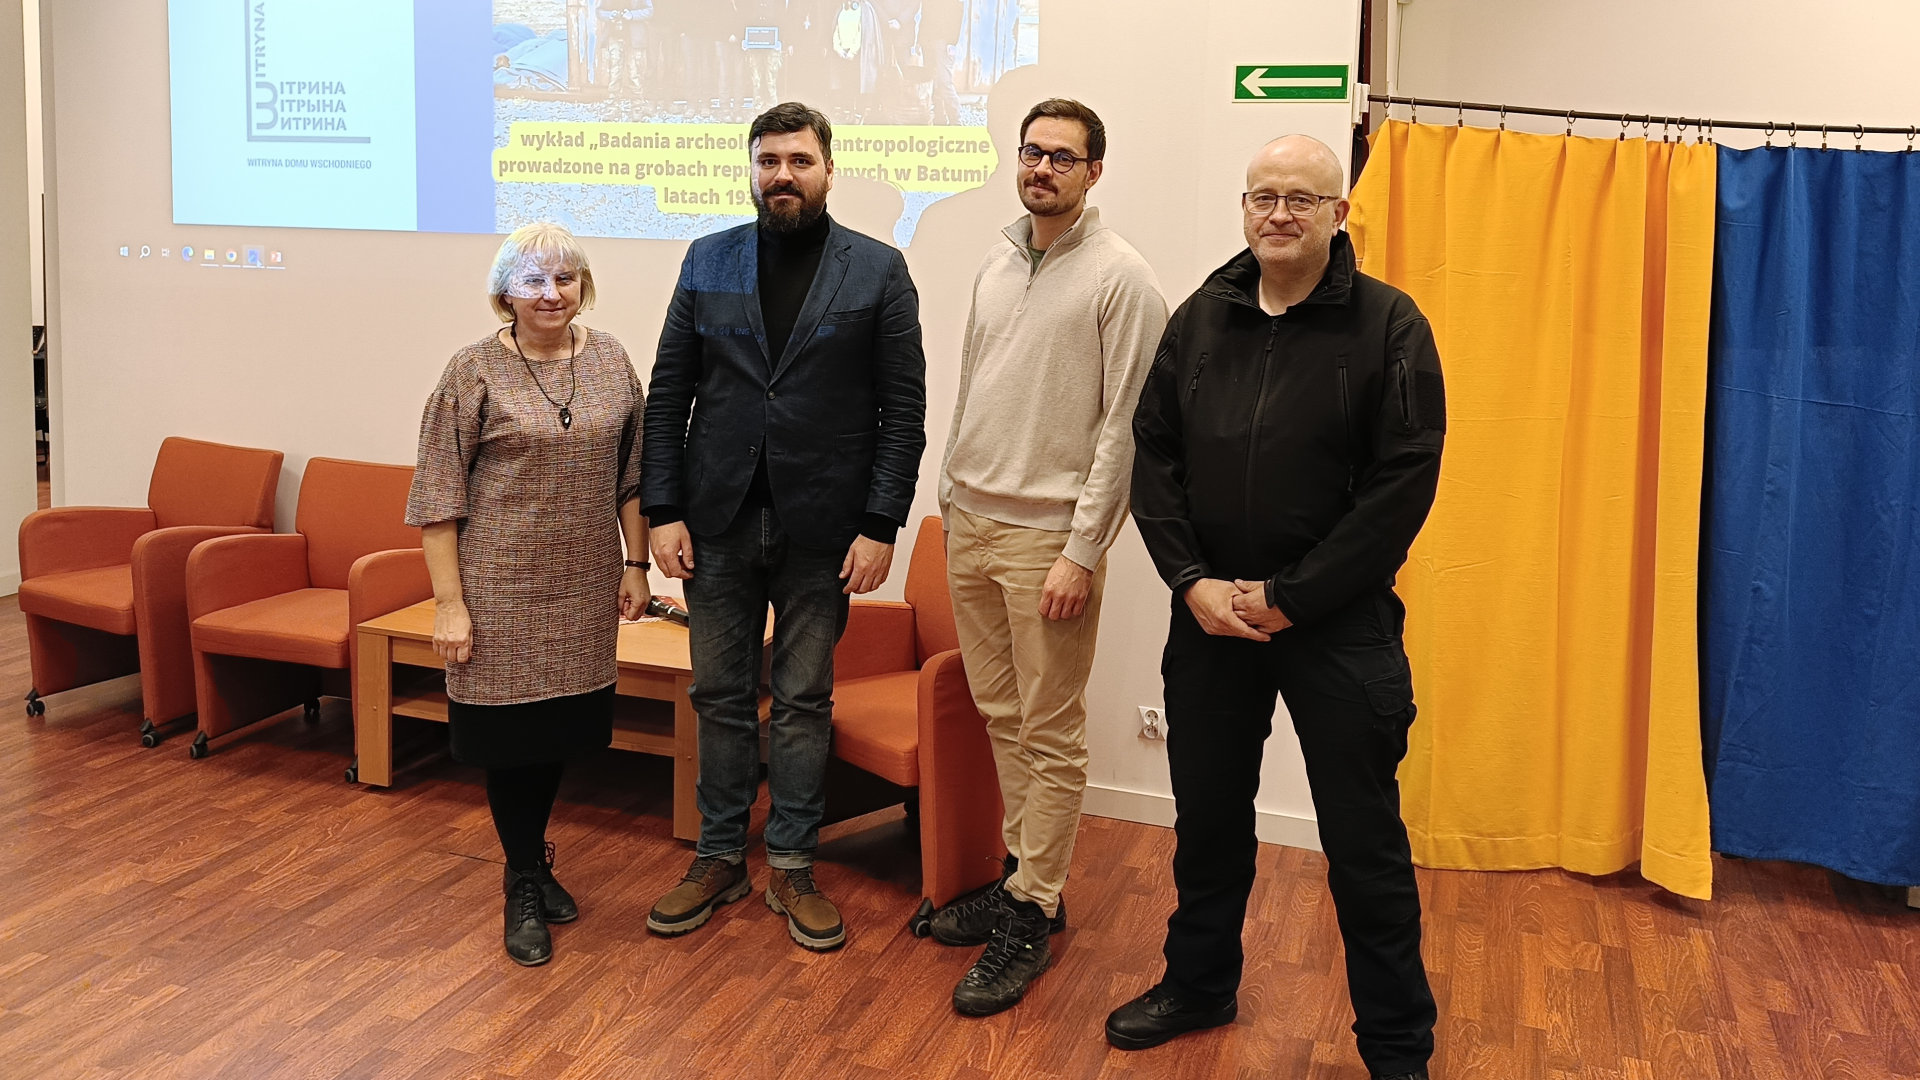 IDFI held a lecture and a film screening about the mass graves of Batumi in Poland